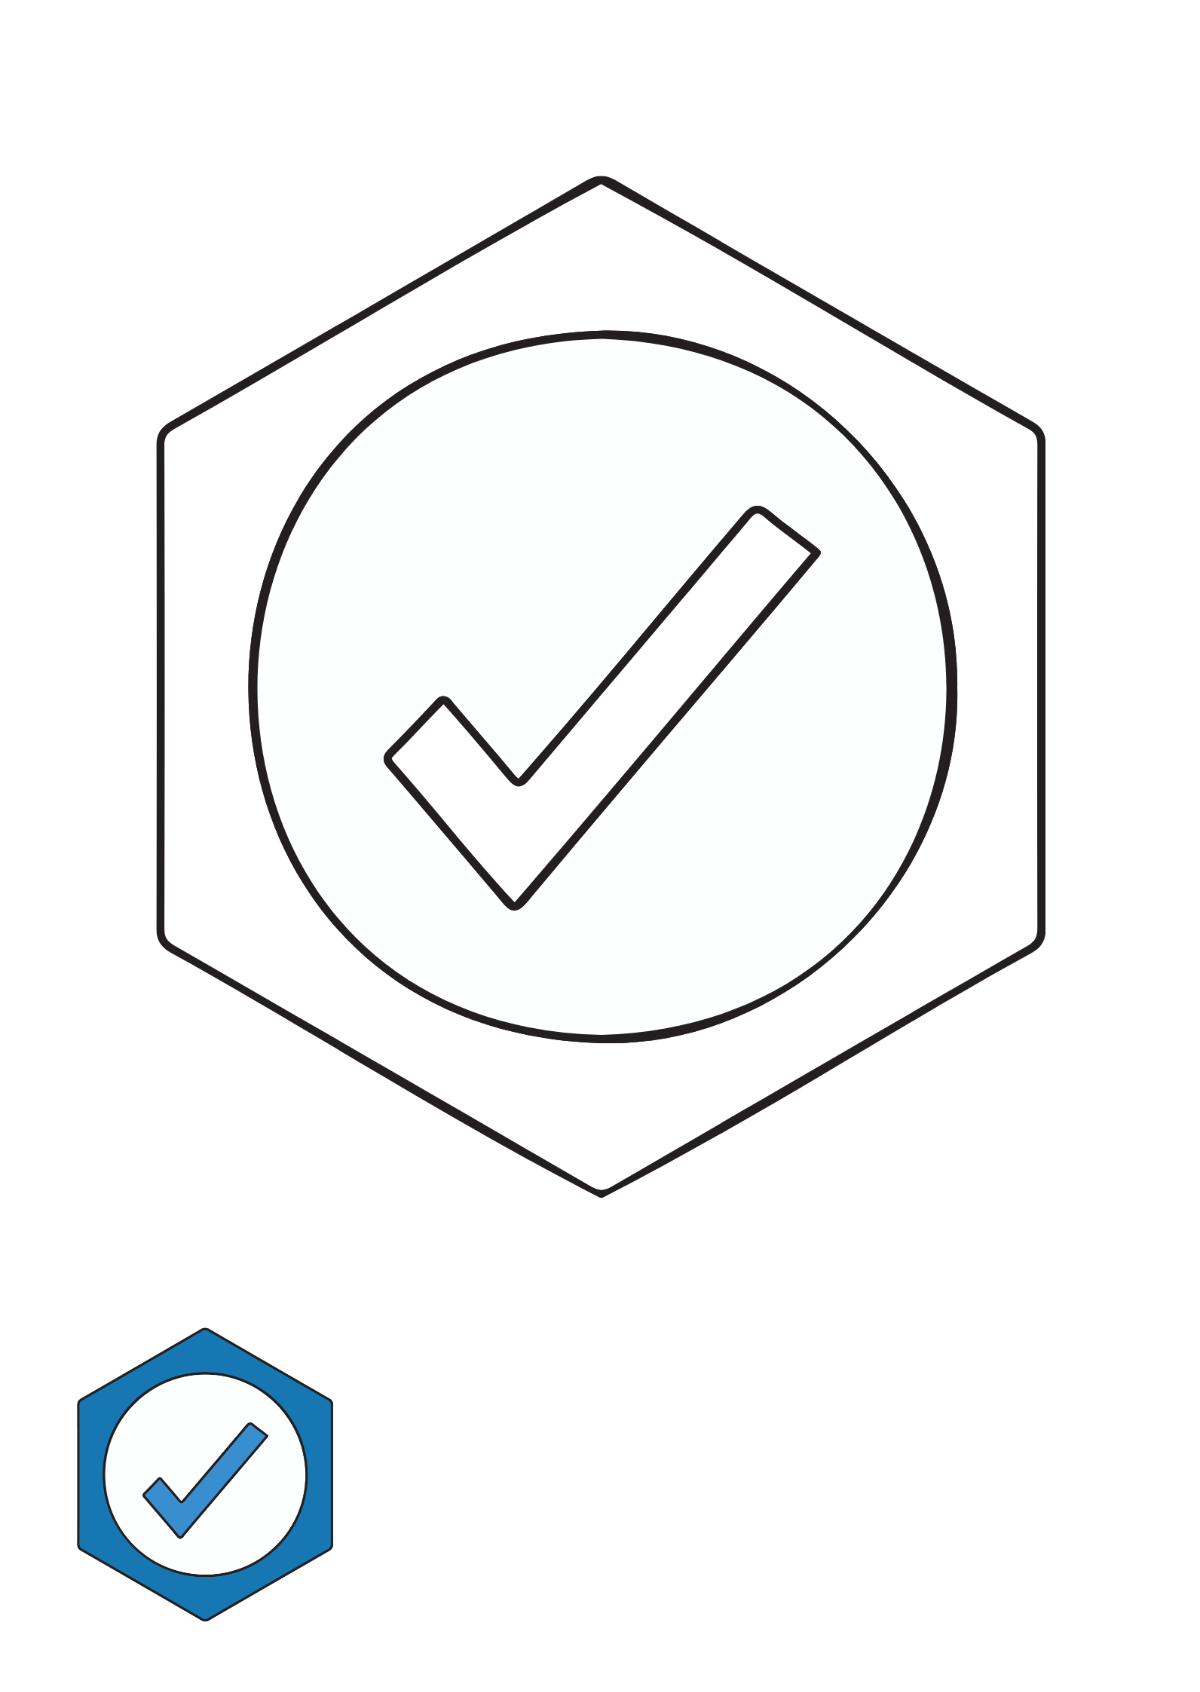 Check Mark Design coloring page Template